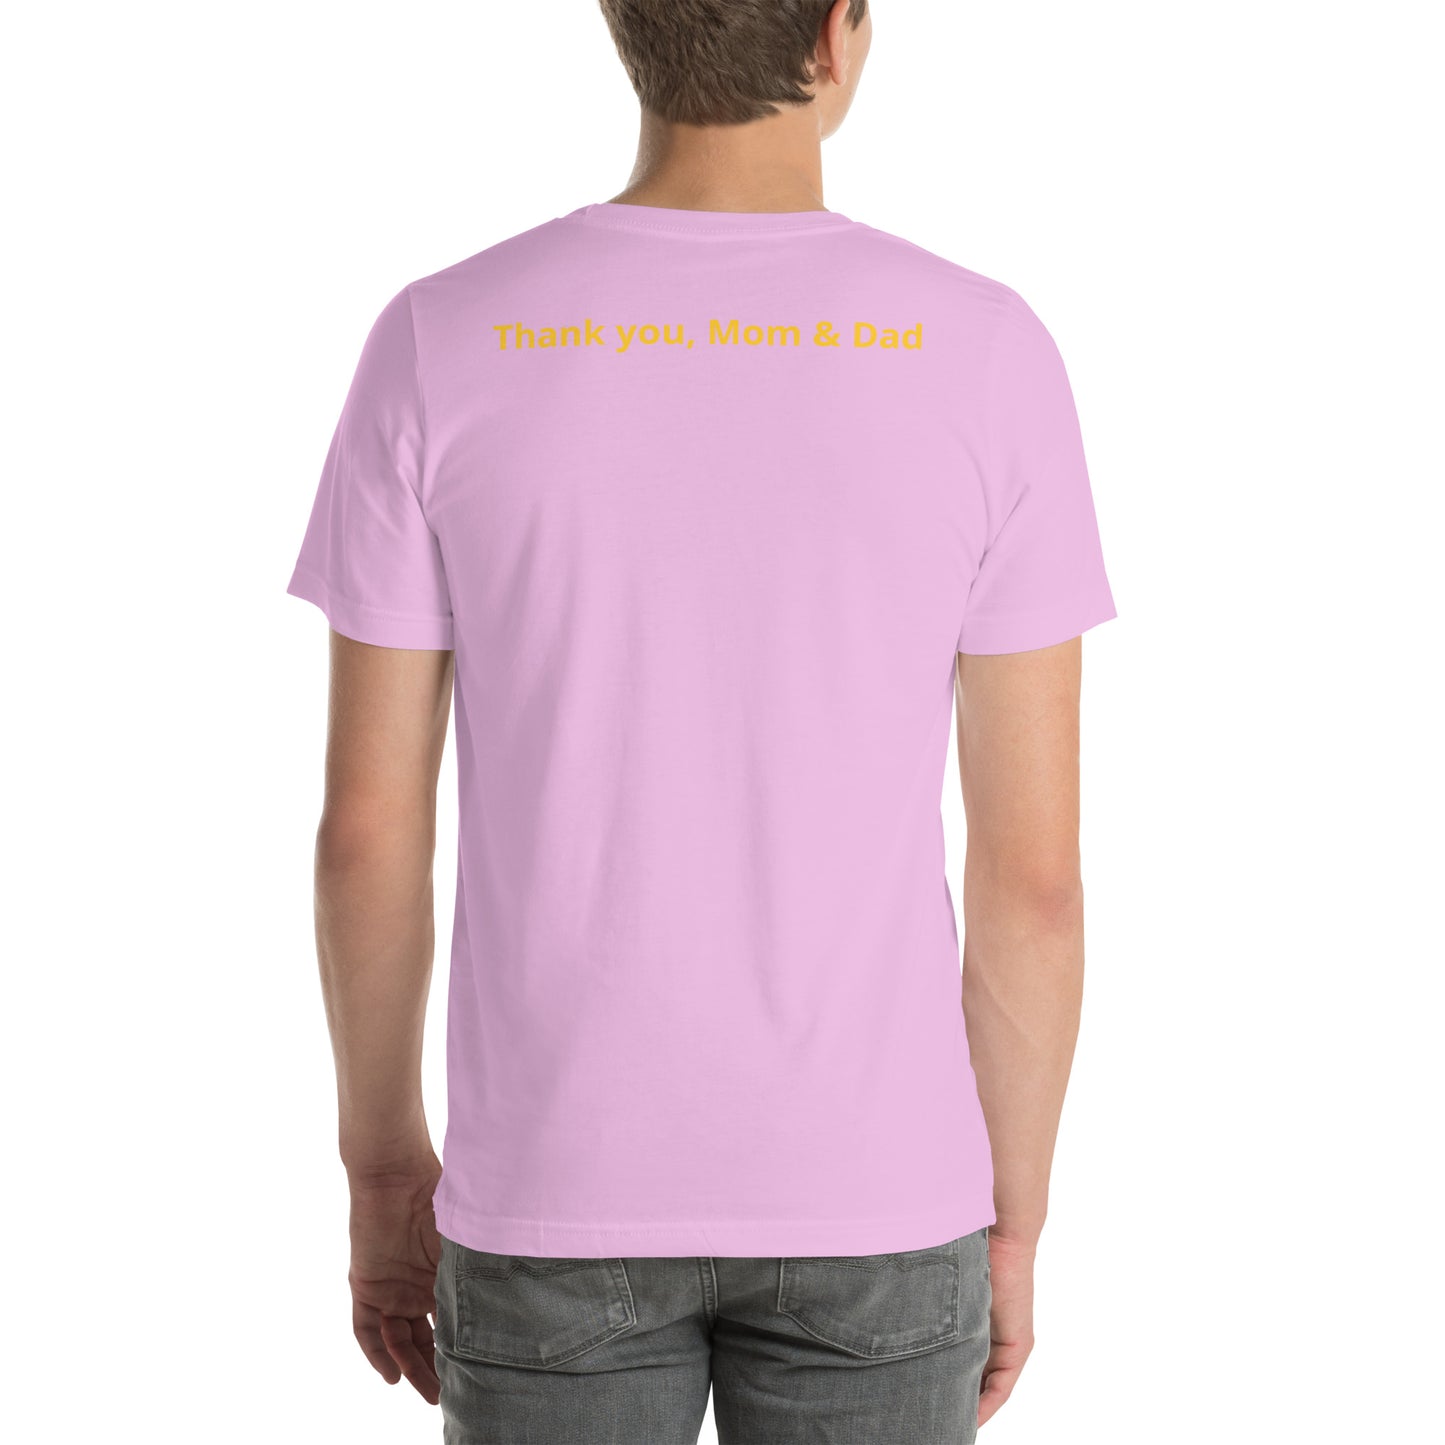 Spring lilac color short sleeve tee shirt that says "College '24 Grad" on the front and "Thank you, Mom & Dad" on the back in yellow-gold font